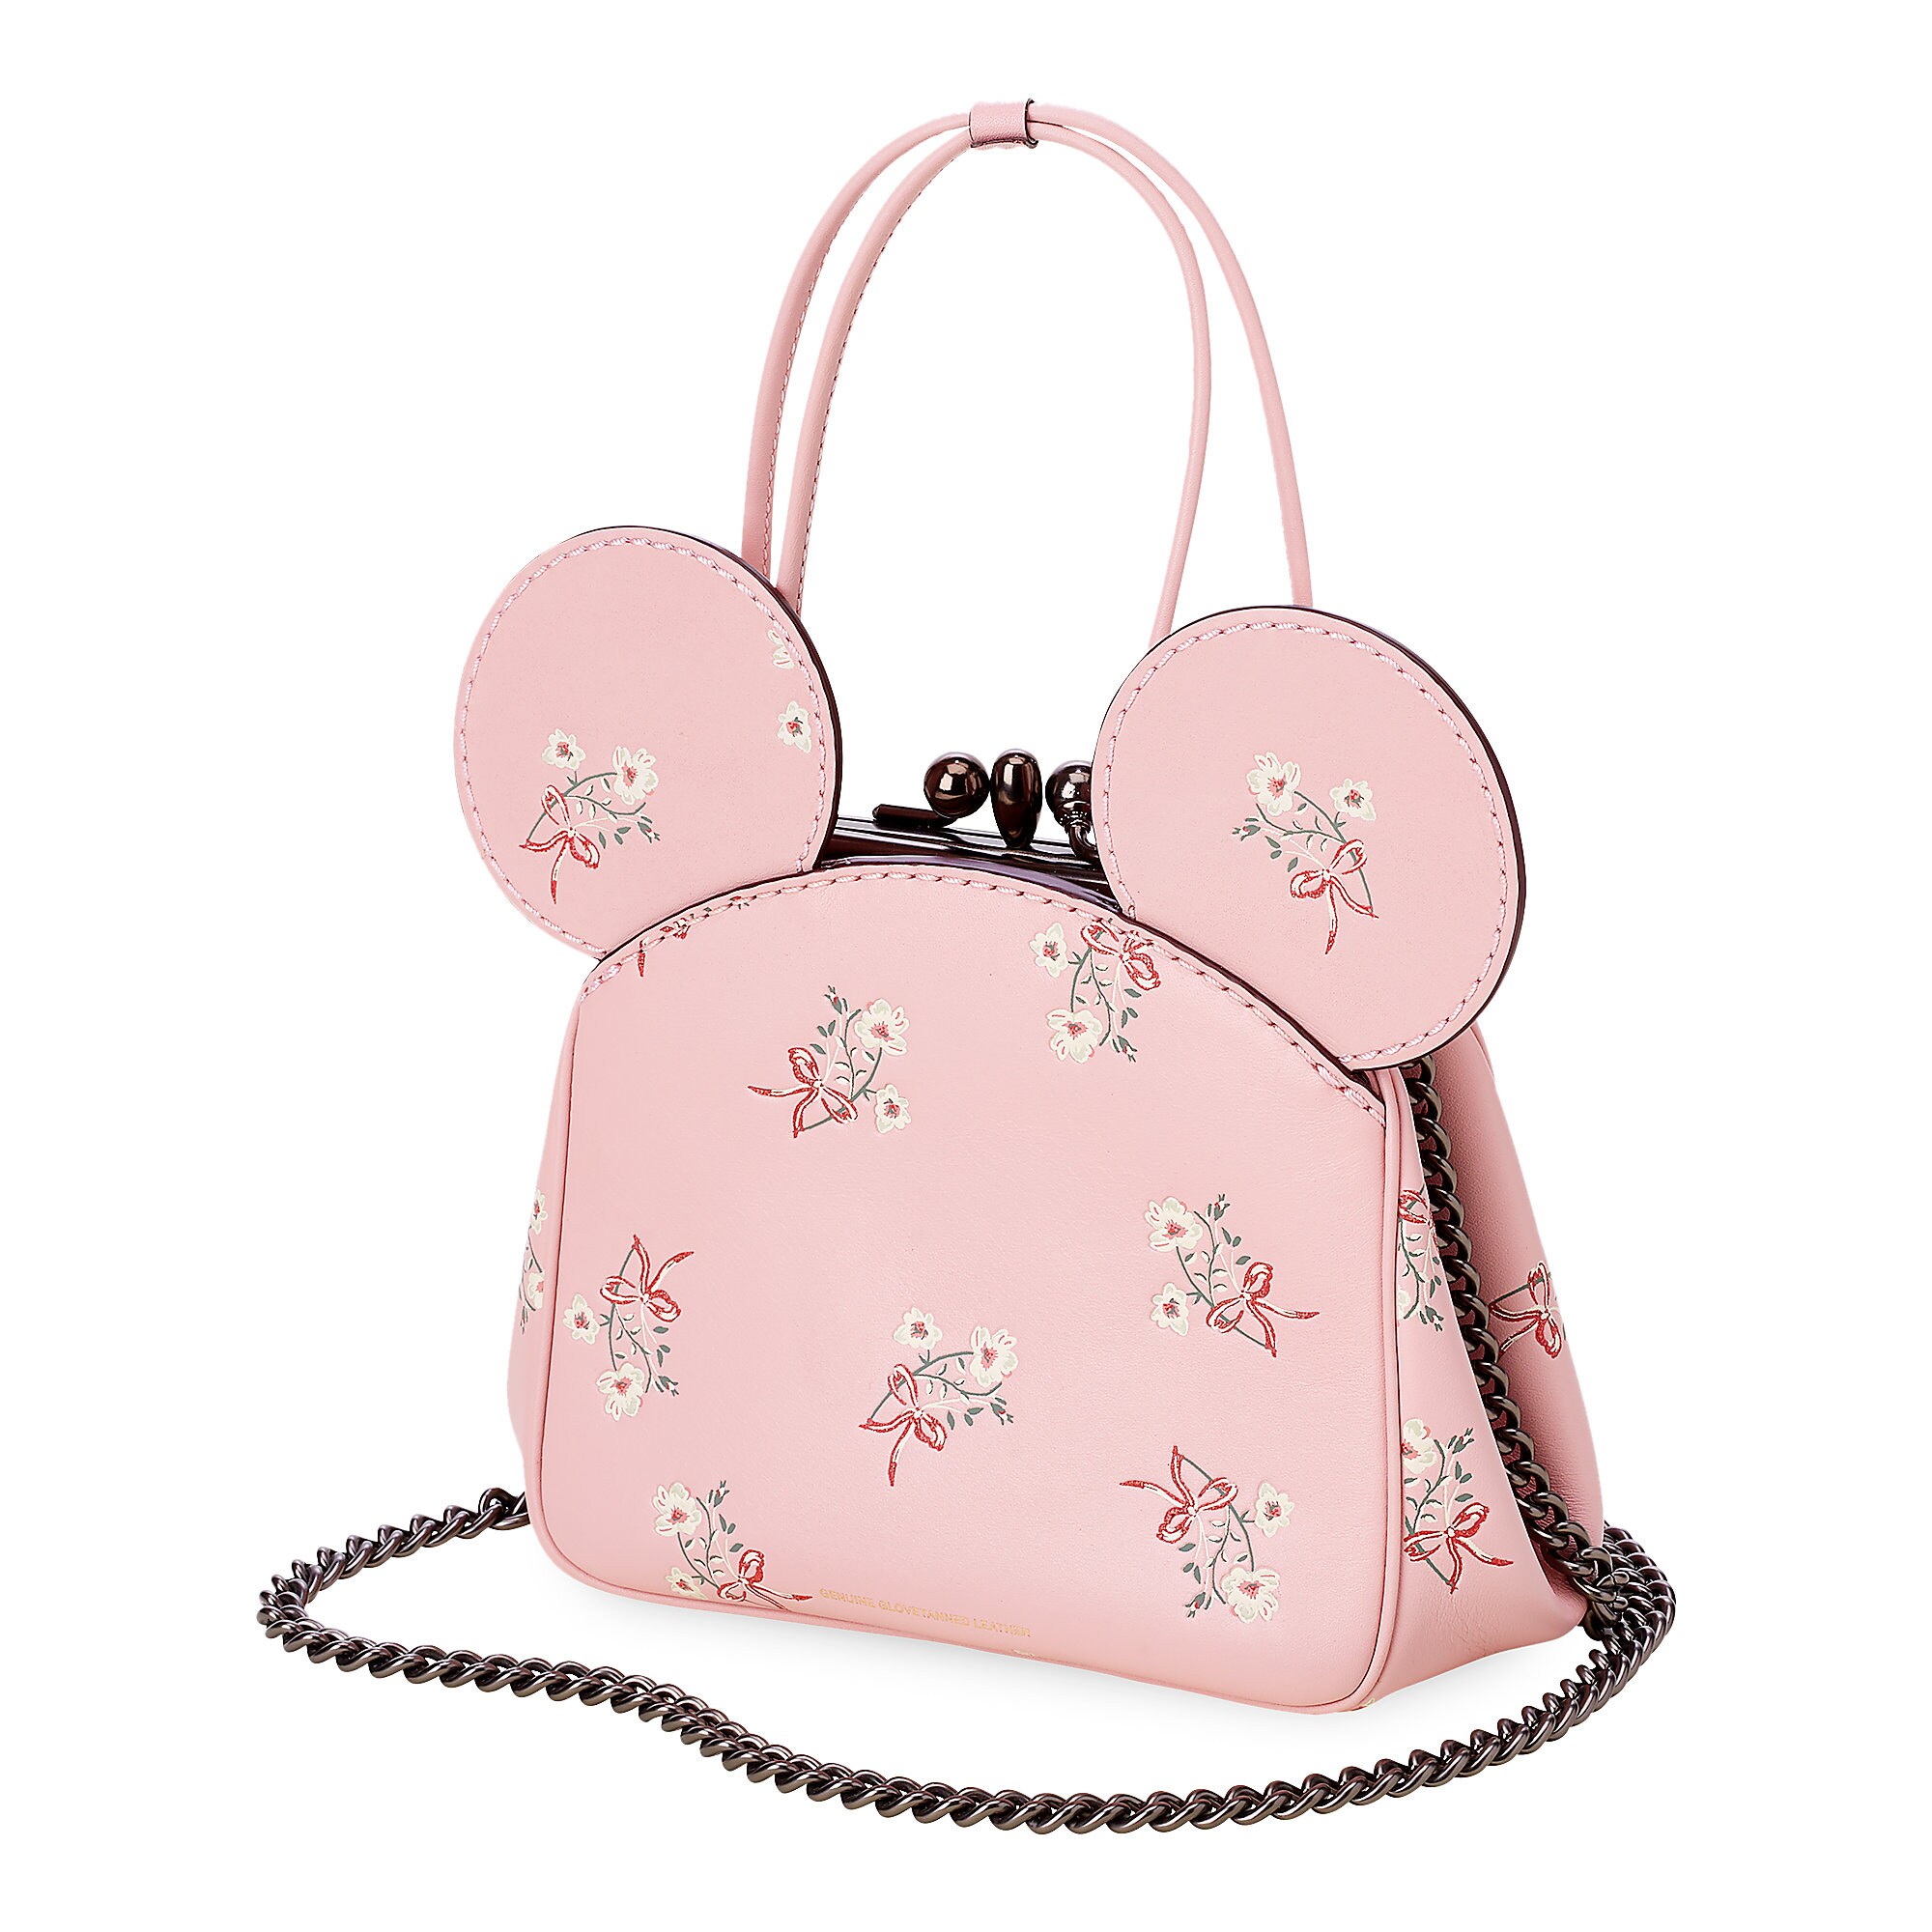 Minnie Mouse Floral Kisslock Leather Bag by COACH - Pink